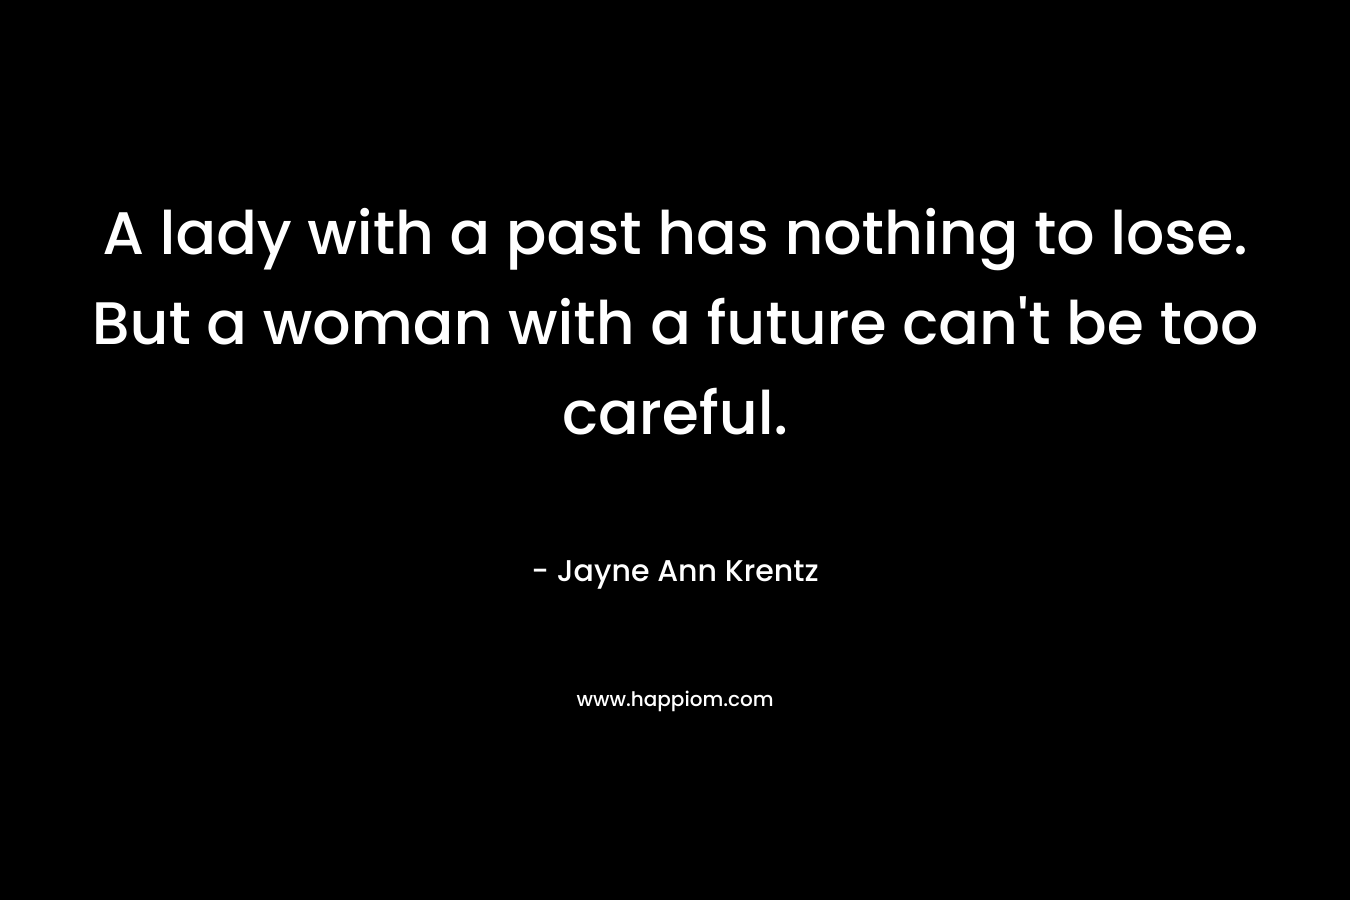 A lady with a past has nothing to lose. But a woman with a future can’t be too careful. – Jayne Ann Krentz